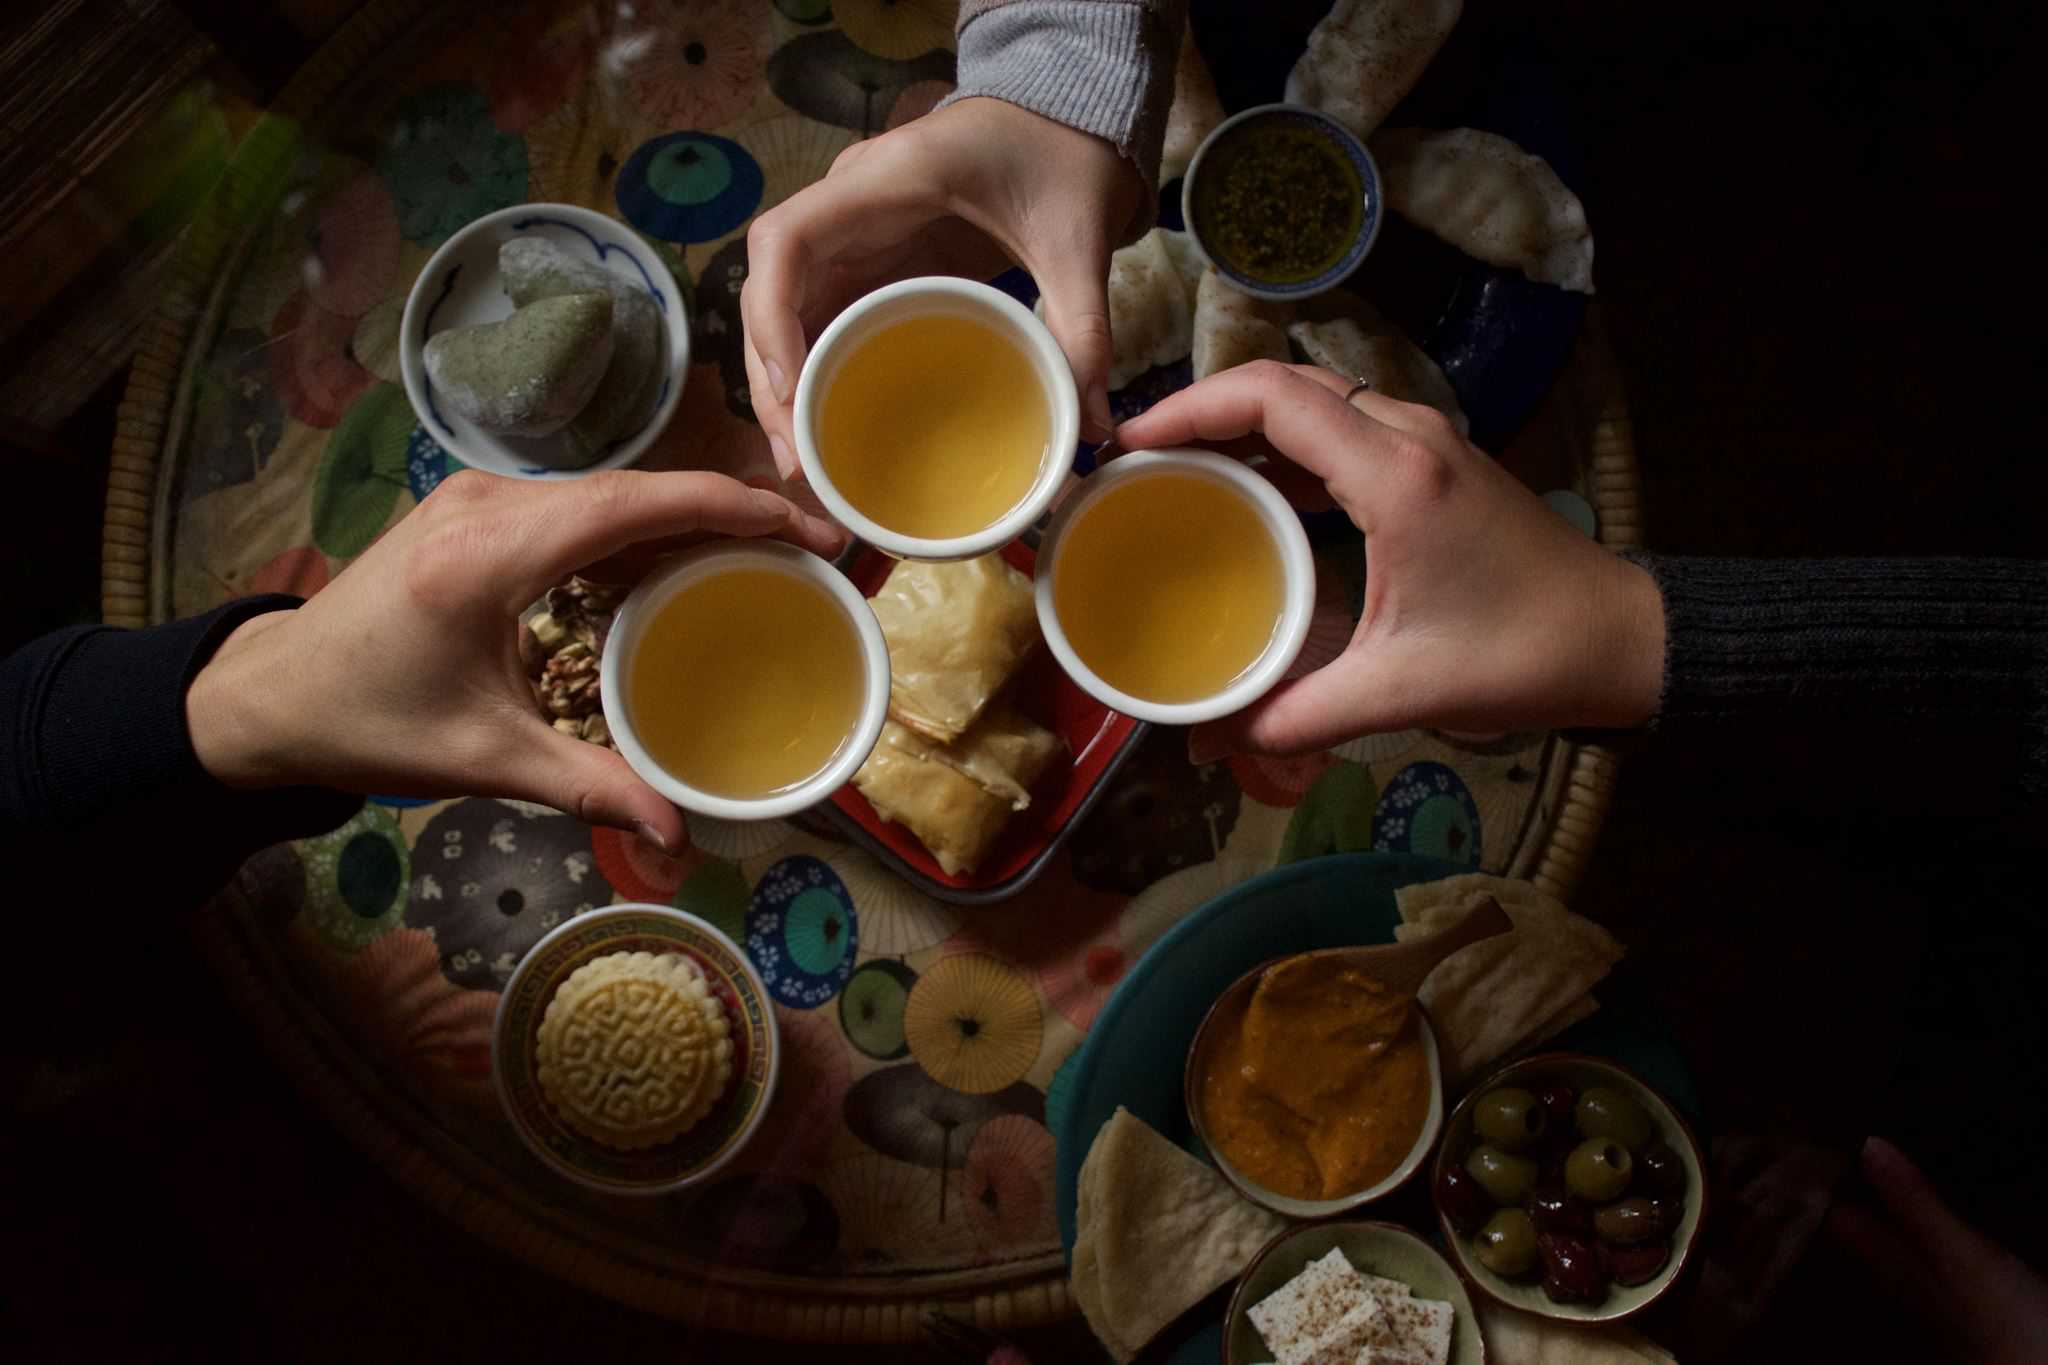 Dobra Tea - Cheers hands with tea cups and food